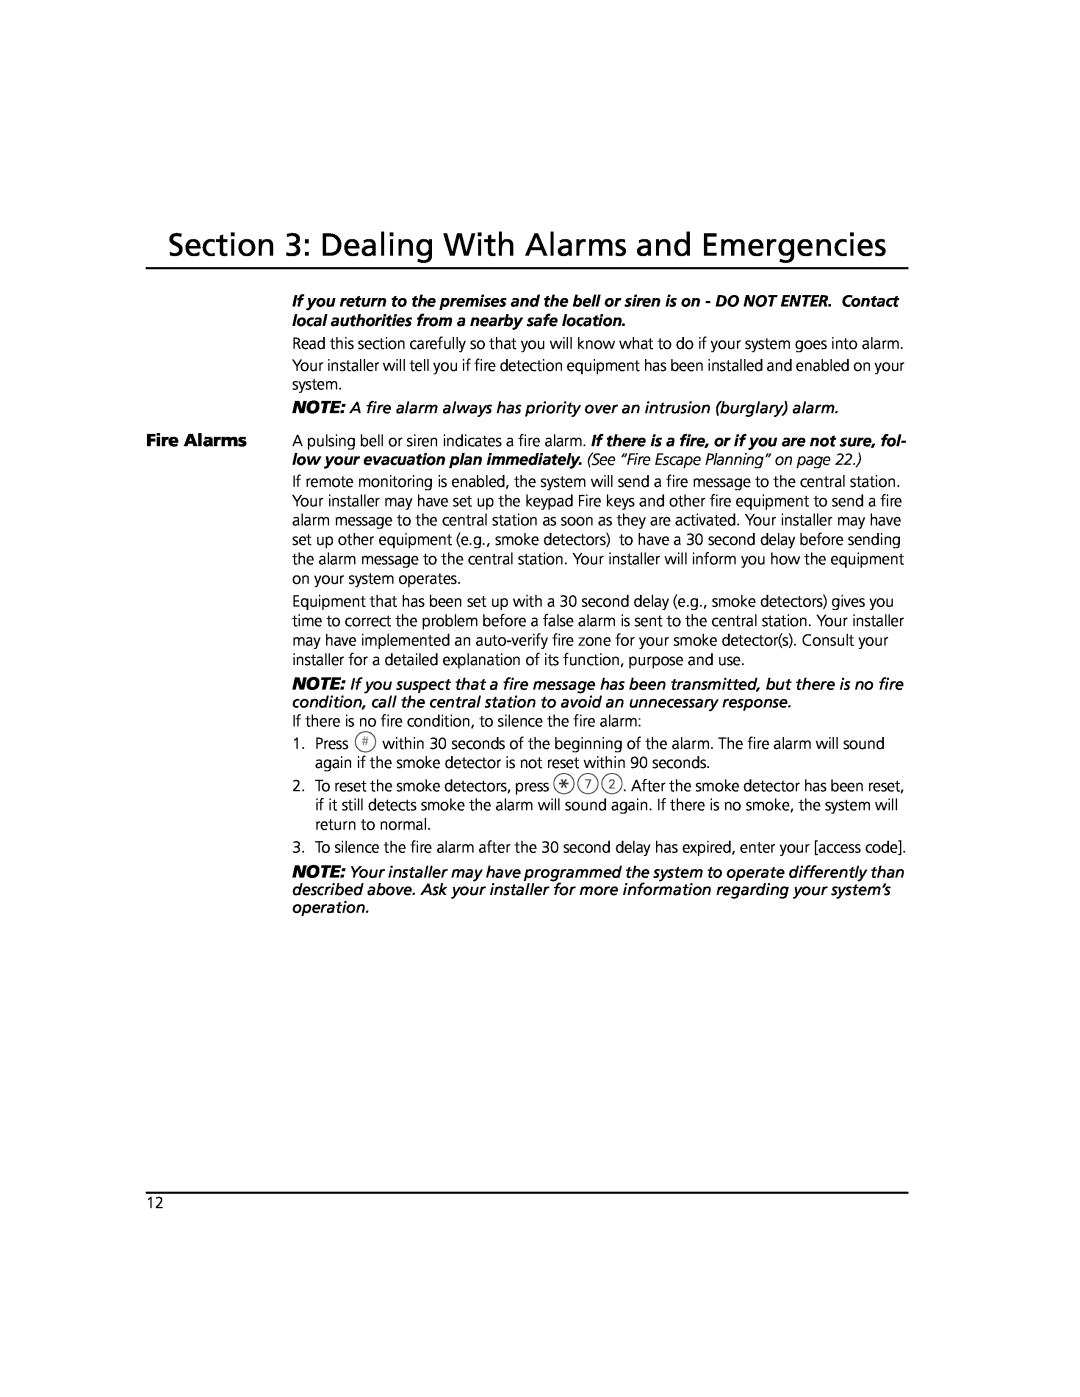 ADT Security Services Power 864 manual Dealing With Alarms and Emergencies 